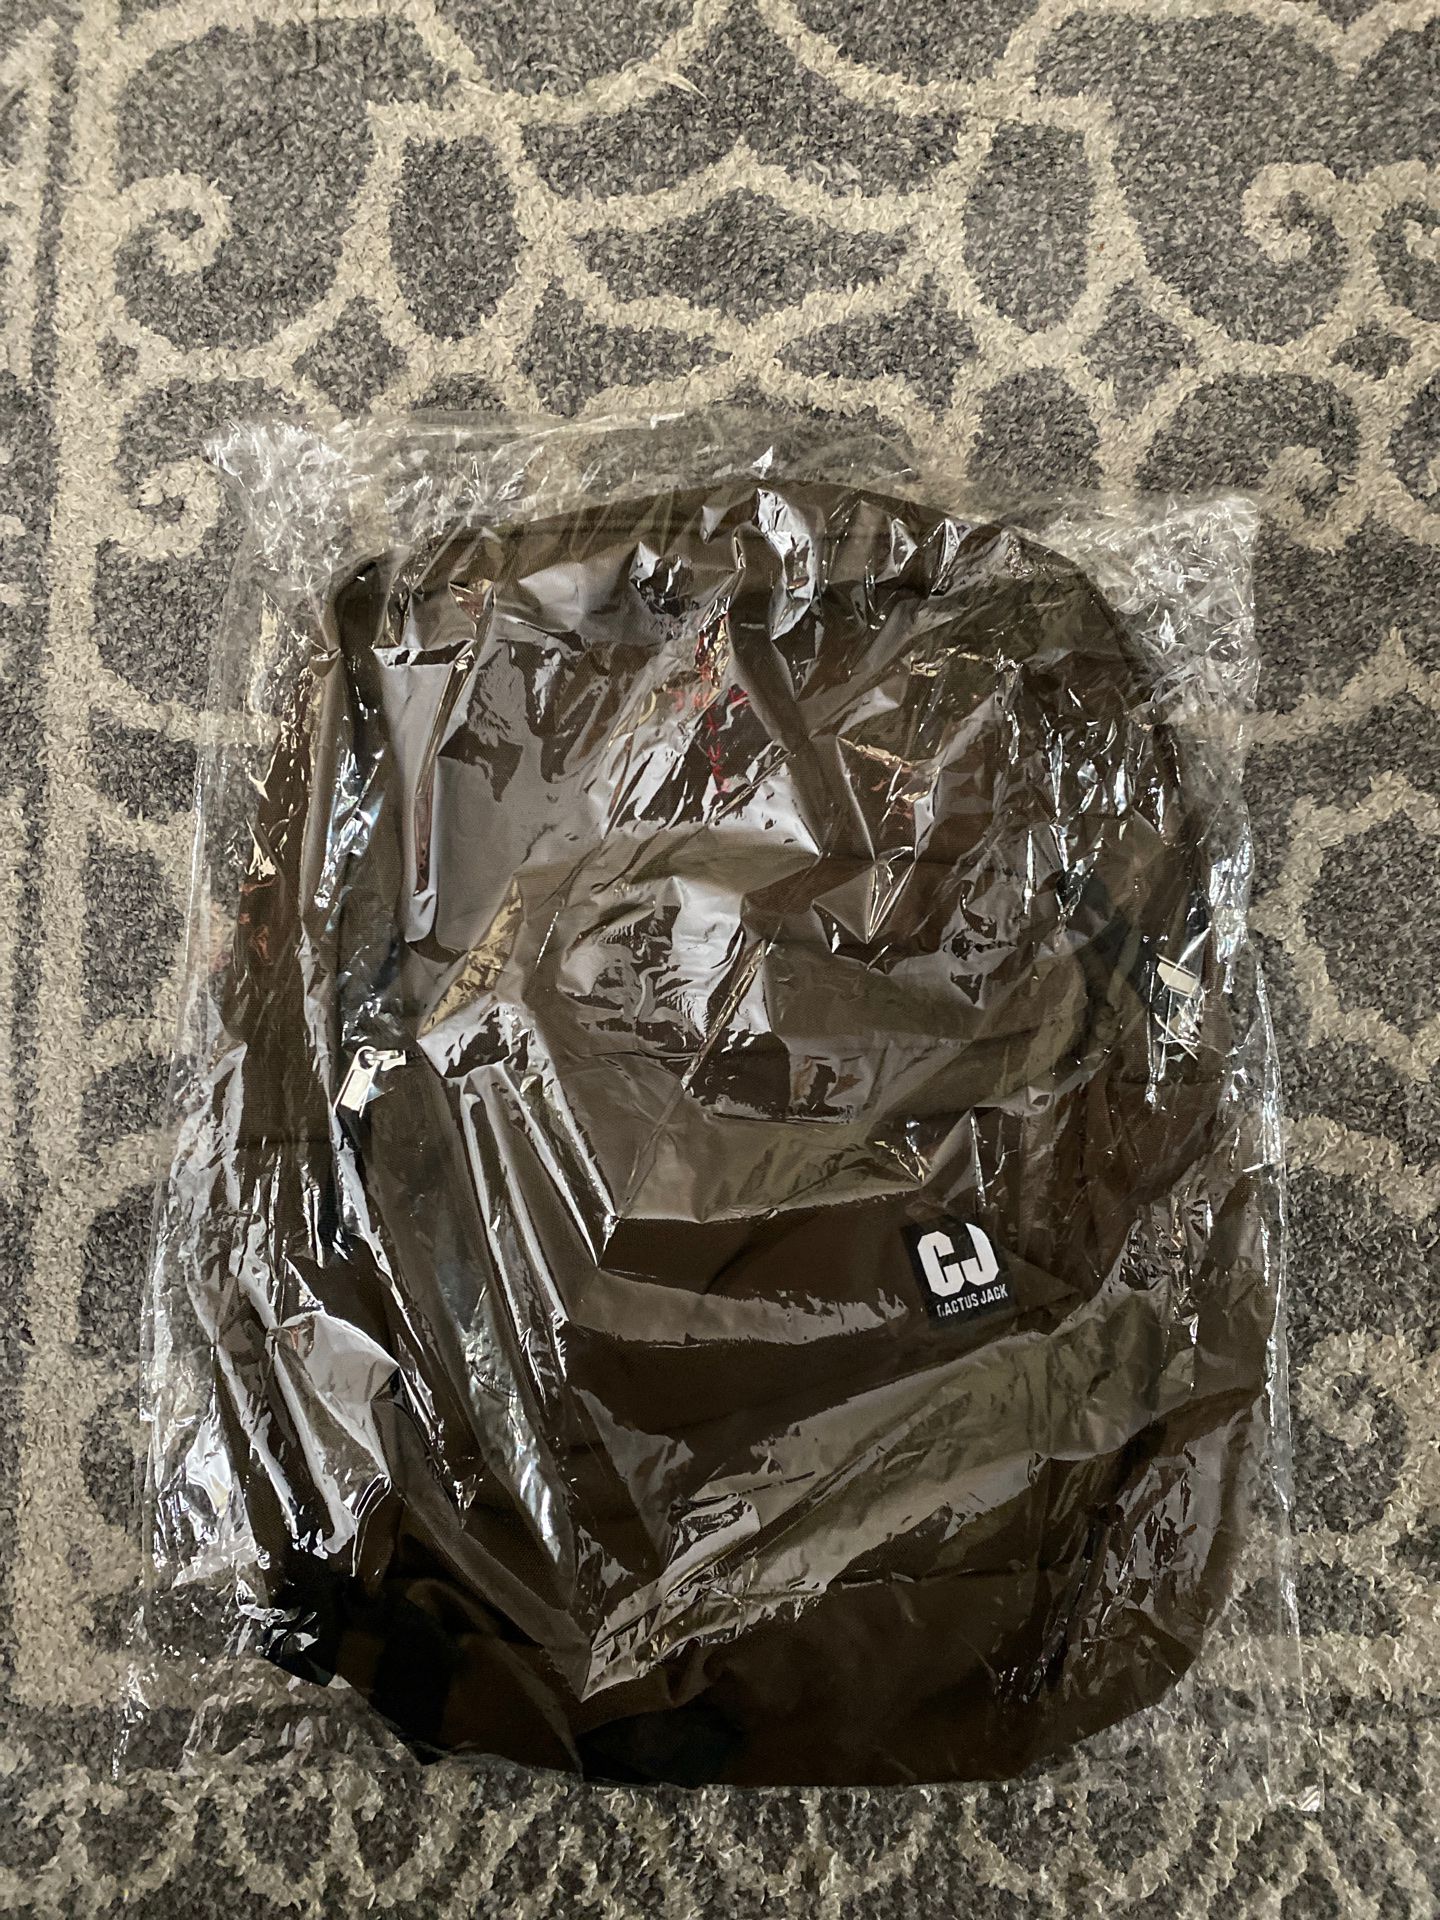 Travis Scott Cactus Jack Backpack with Patches